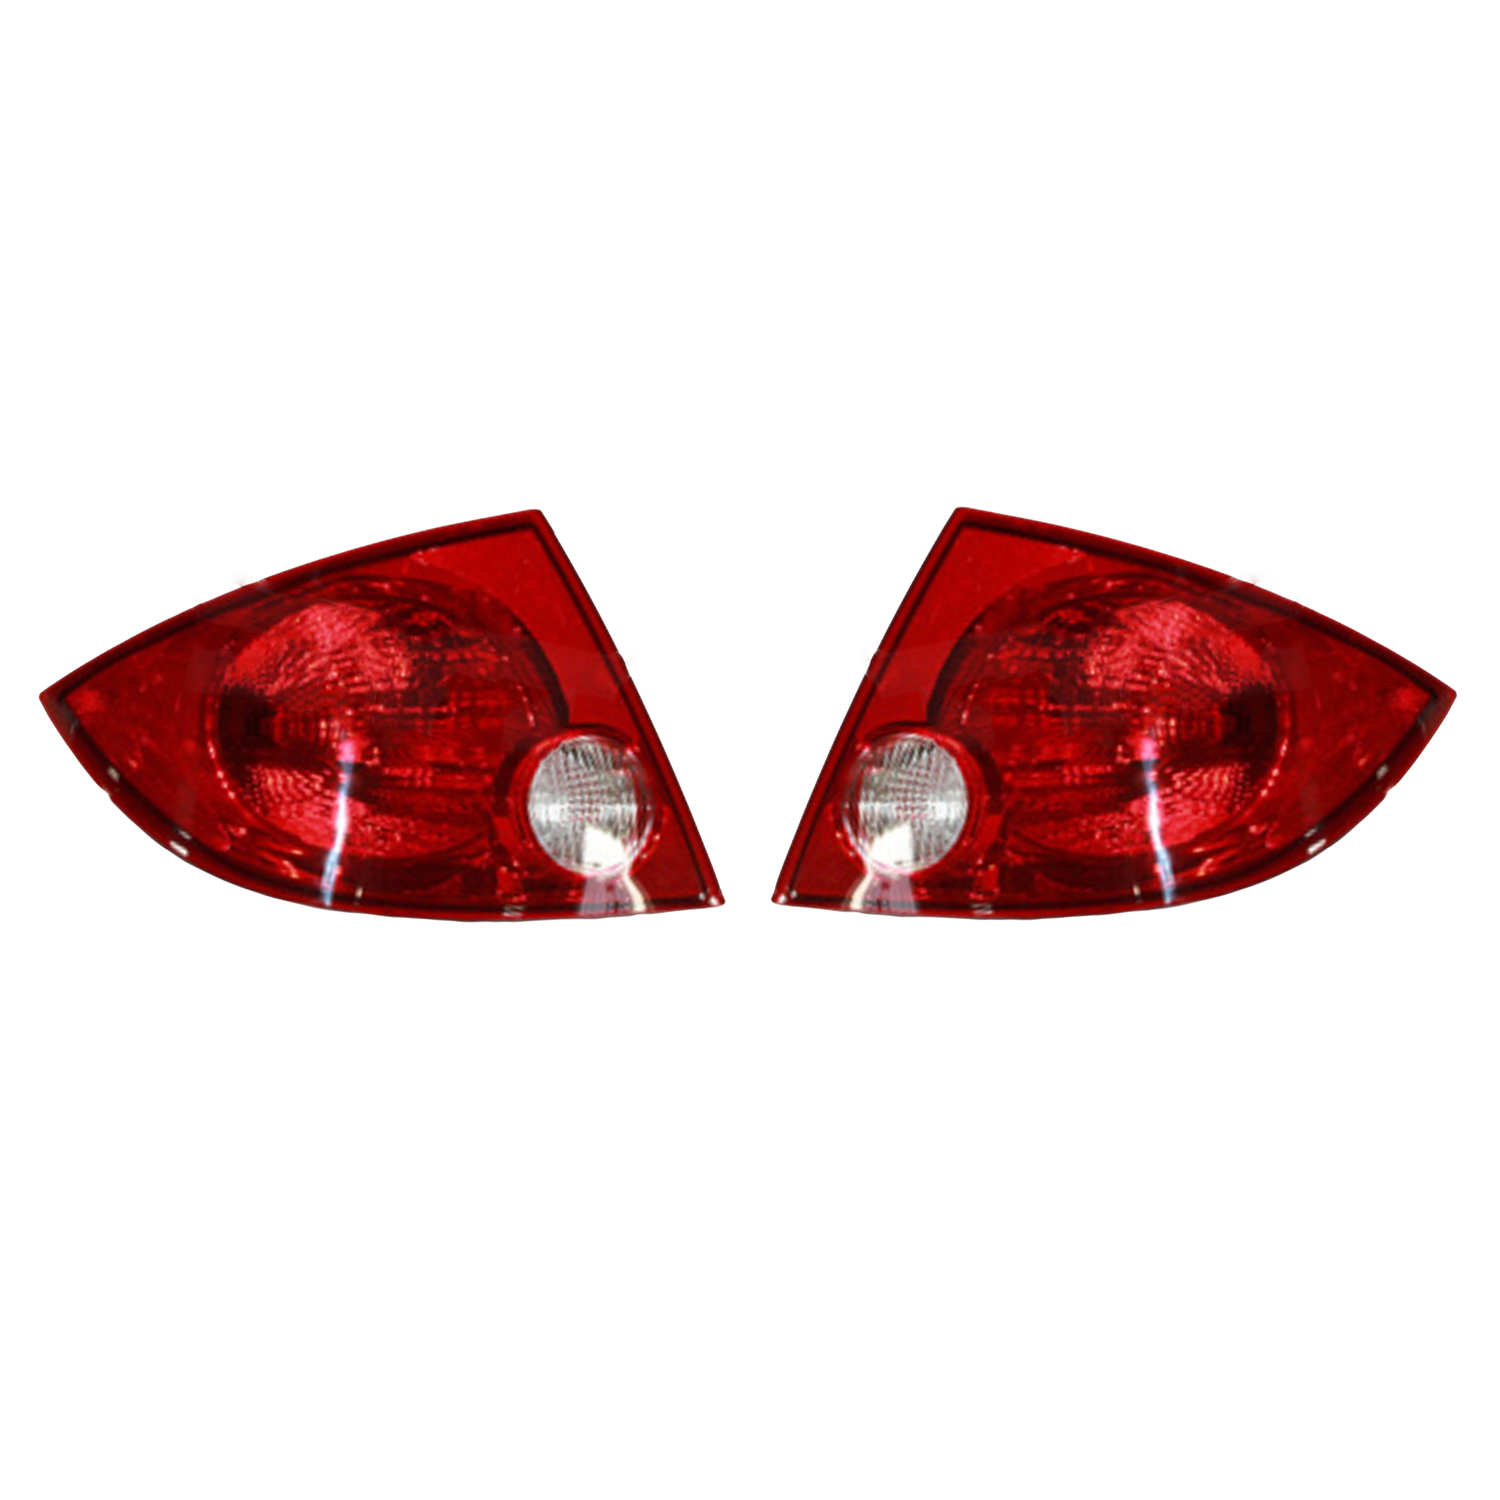 Rareelectrical NEW PAIR OF TAIL LIGHTS COMPATIBLE WITH PONTIAC PERSUIT SEDAN 2005 2006 GM2801190 GM2800190 22751401 22751402